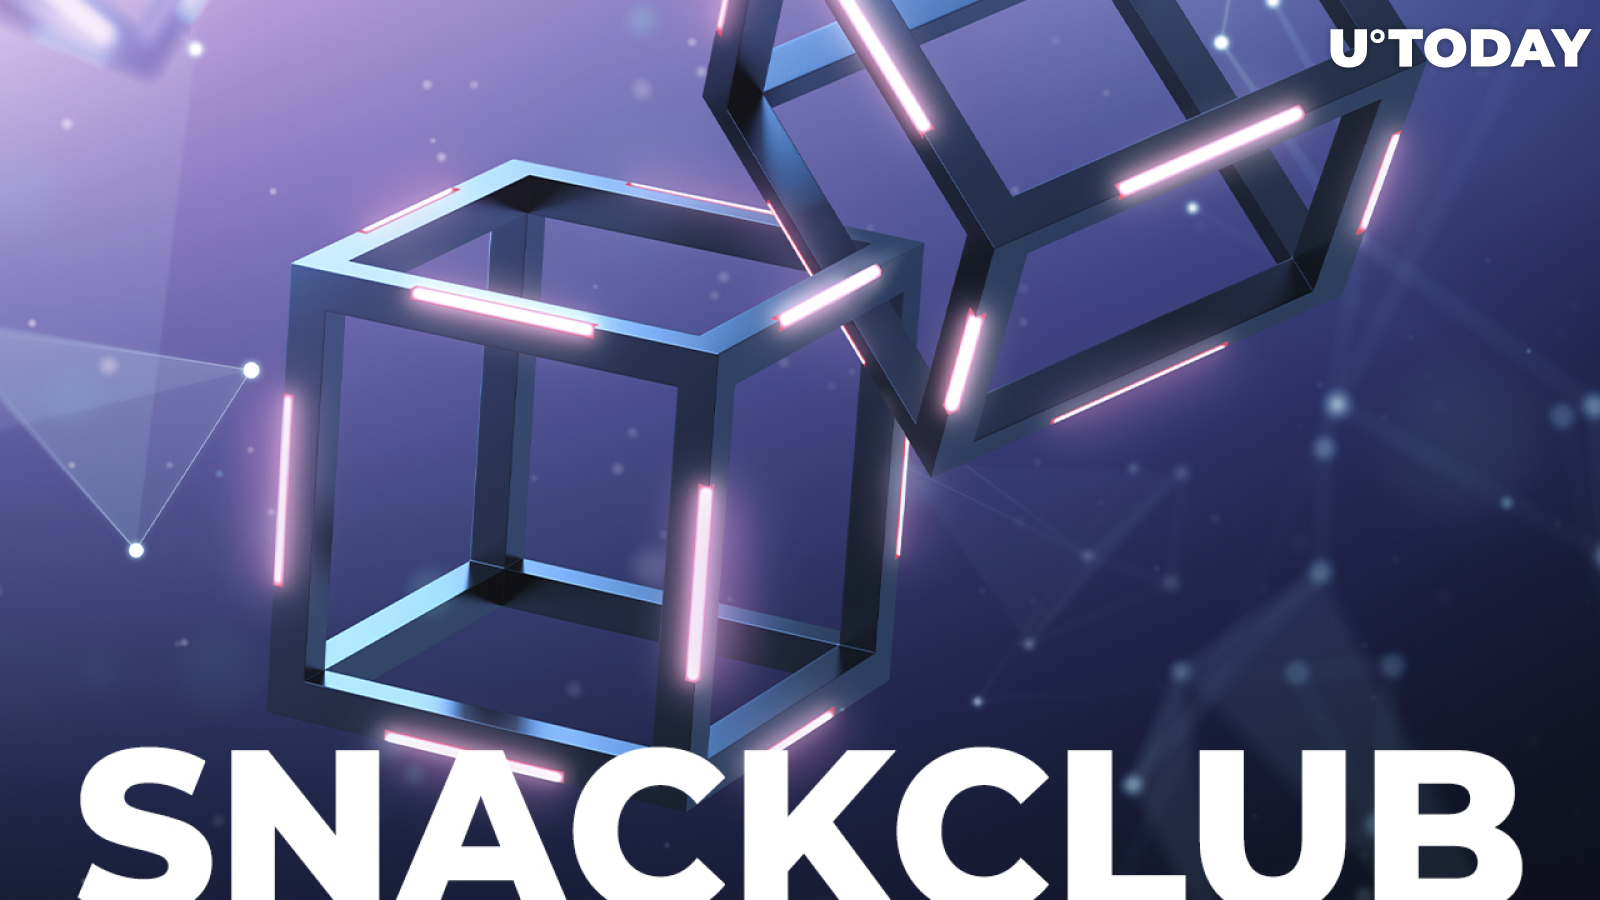 SNACKCLUB Raises $9 Million in Seed Funding to Support Gaming in Emerging Economies